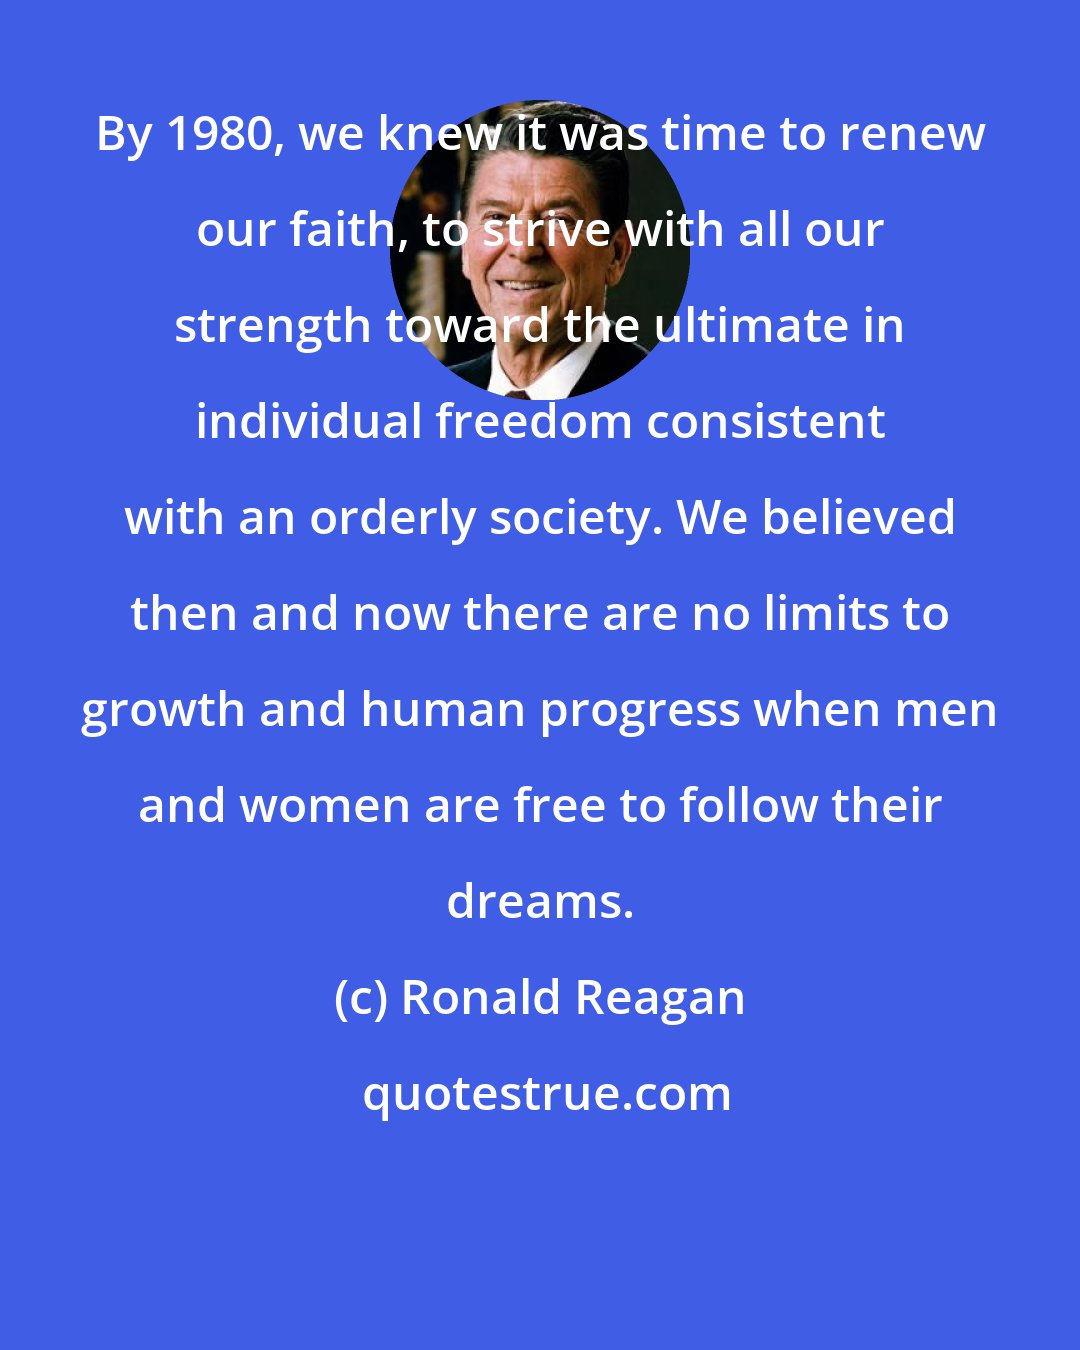 Ronald Reagan: By 1980, we knew it was time to renew our faith, to strive with all our strength toward the ultimate in individual freedom consistent with an orderly society. We believed then and now there are no limits to growth and human progress when men and women are free to follow their dreams.